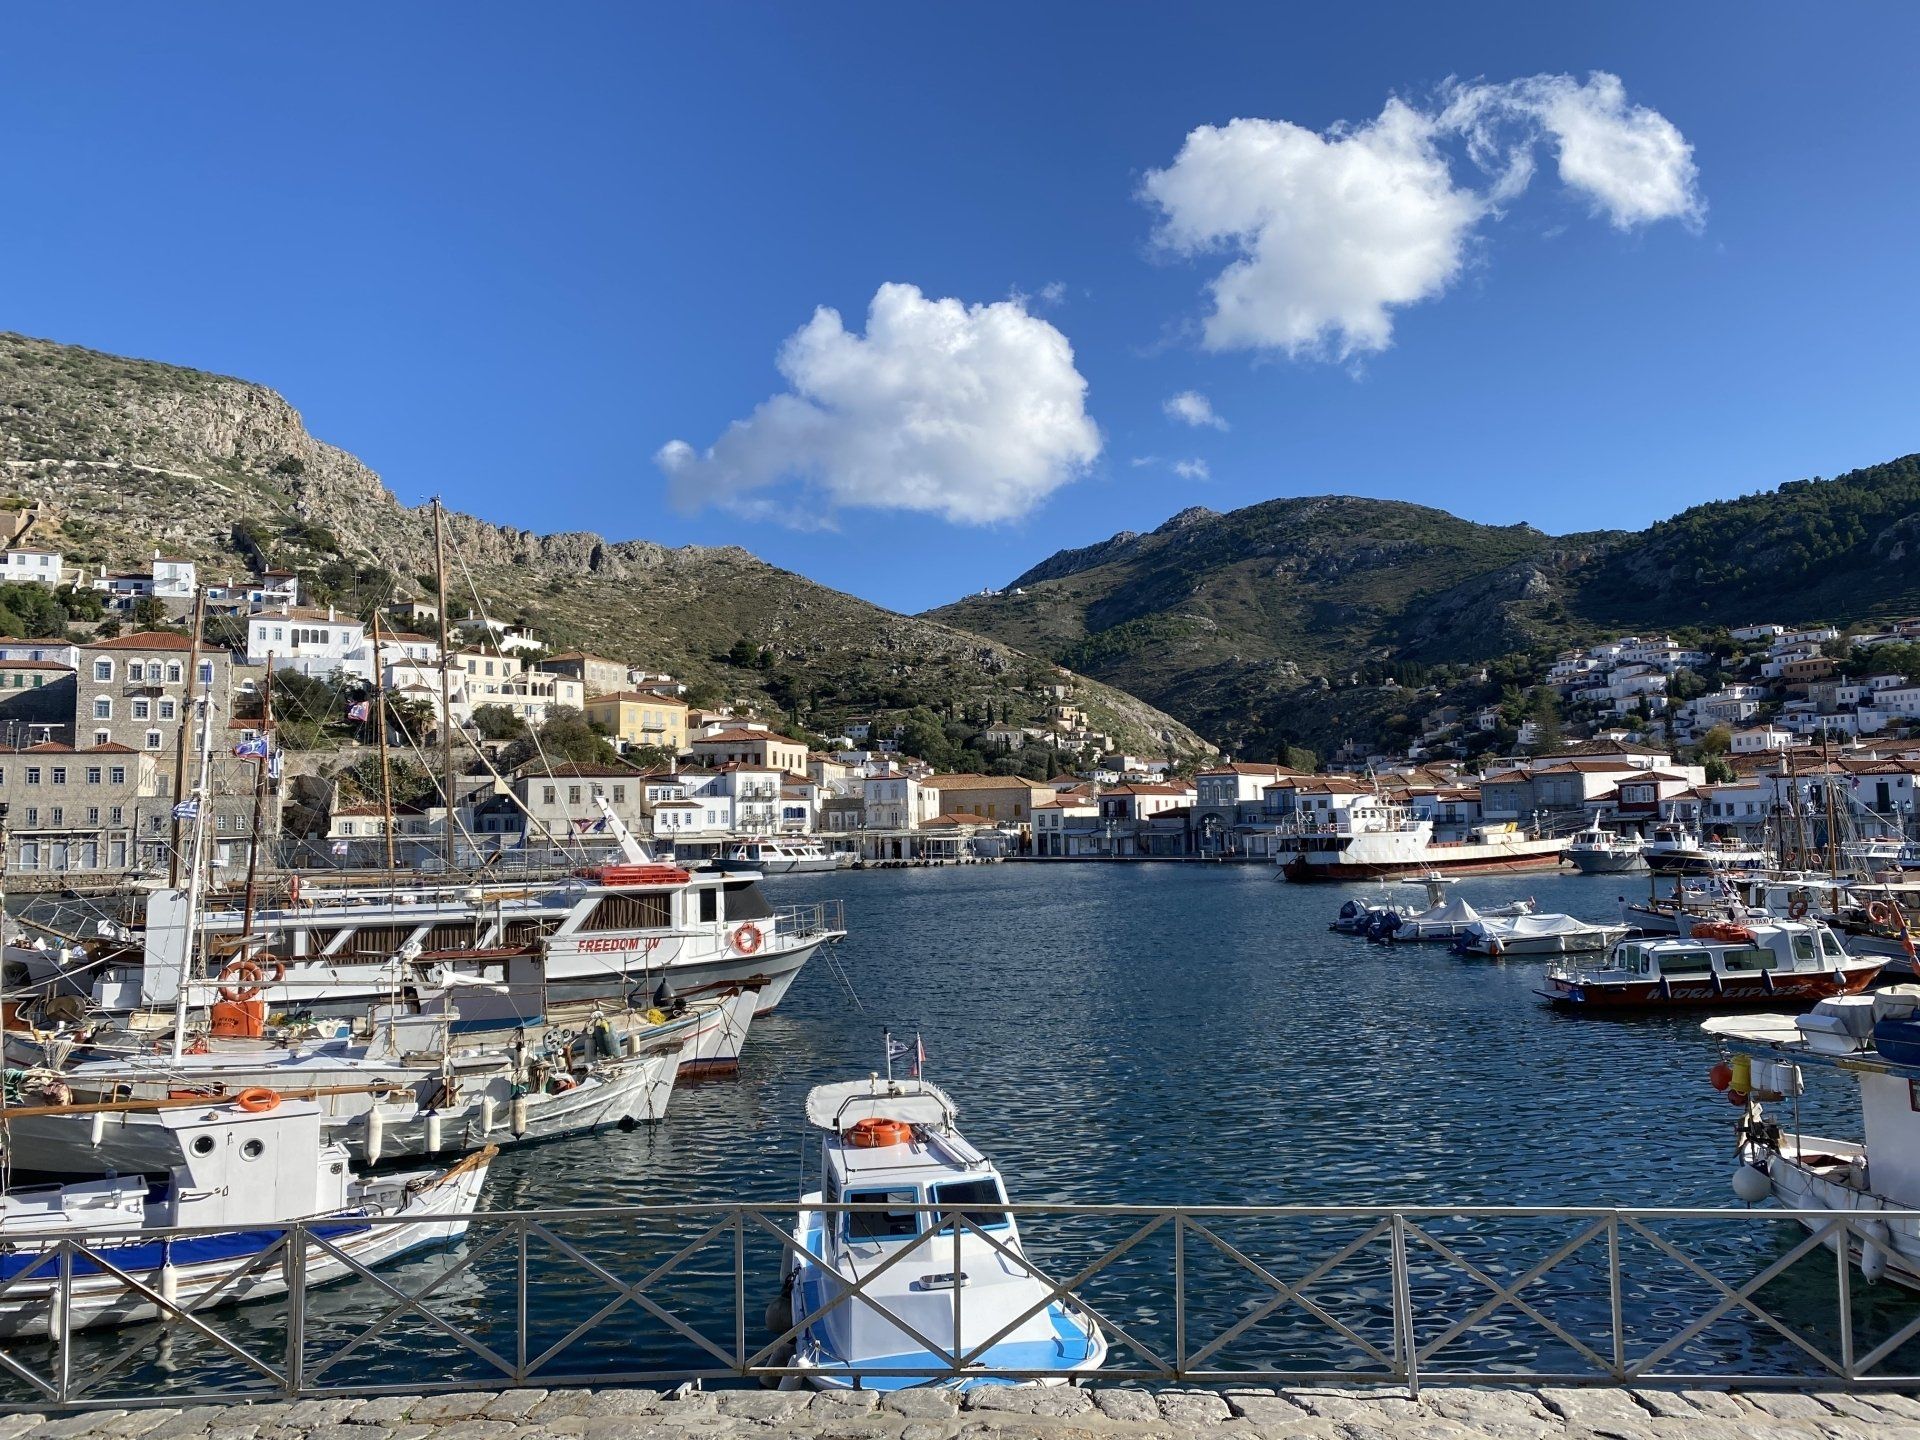 Travel plans to Hydra for the Christmas and New Year have to be cancelled as the strict lockdown is extended to the 7th January 2021